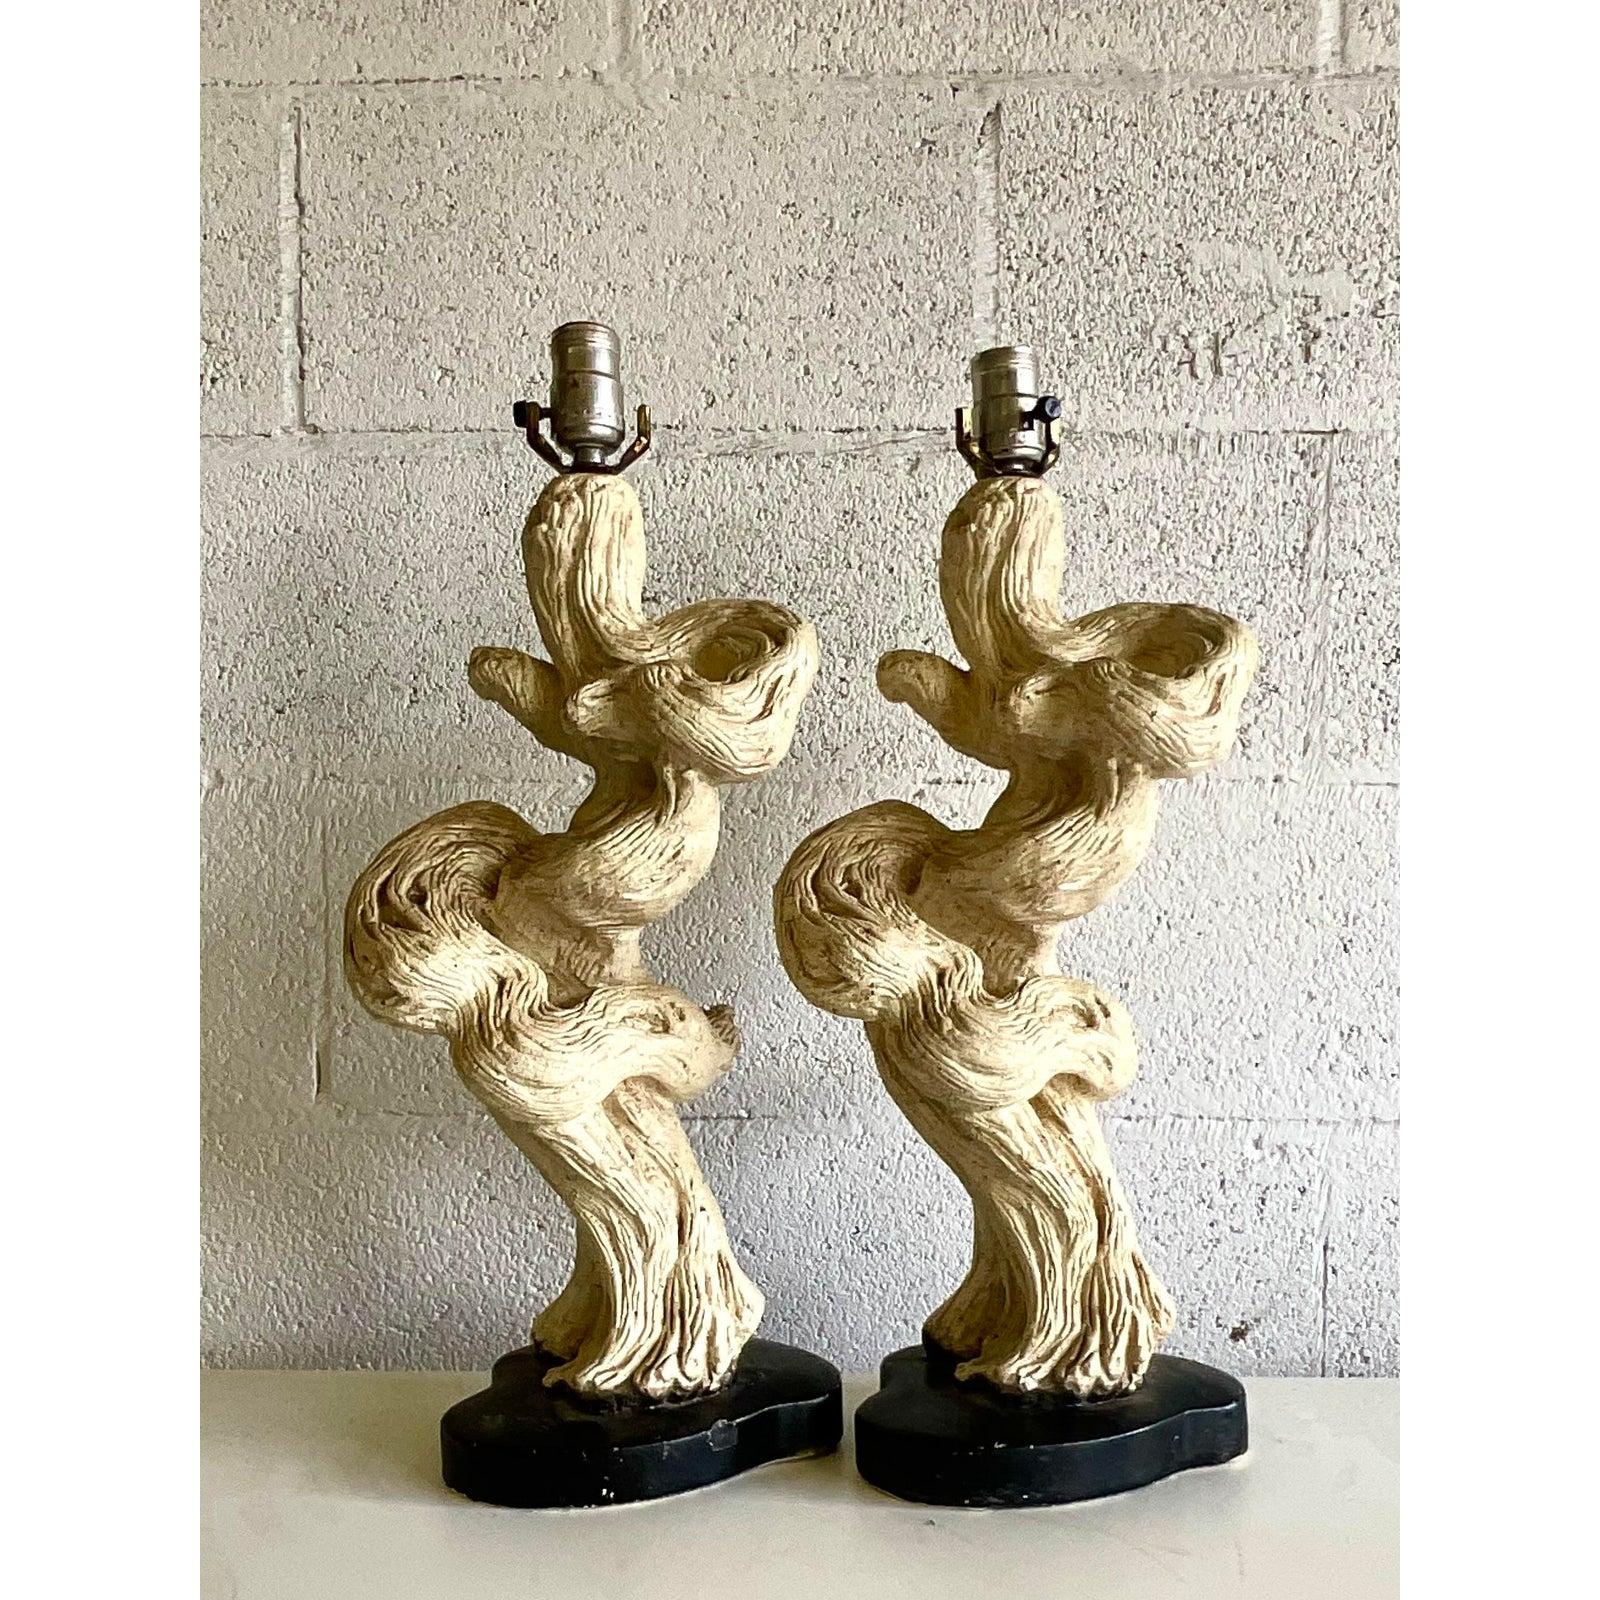 20th Century Vintage Mid-Century Modern Glazed Plaster Driftwood Lamps - a Pair For Sale